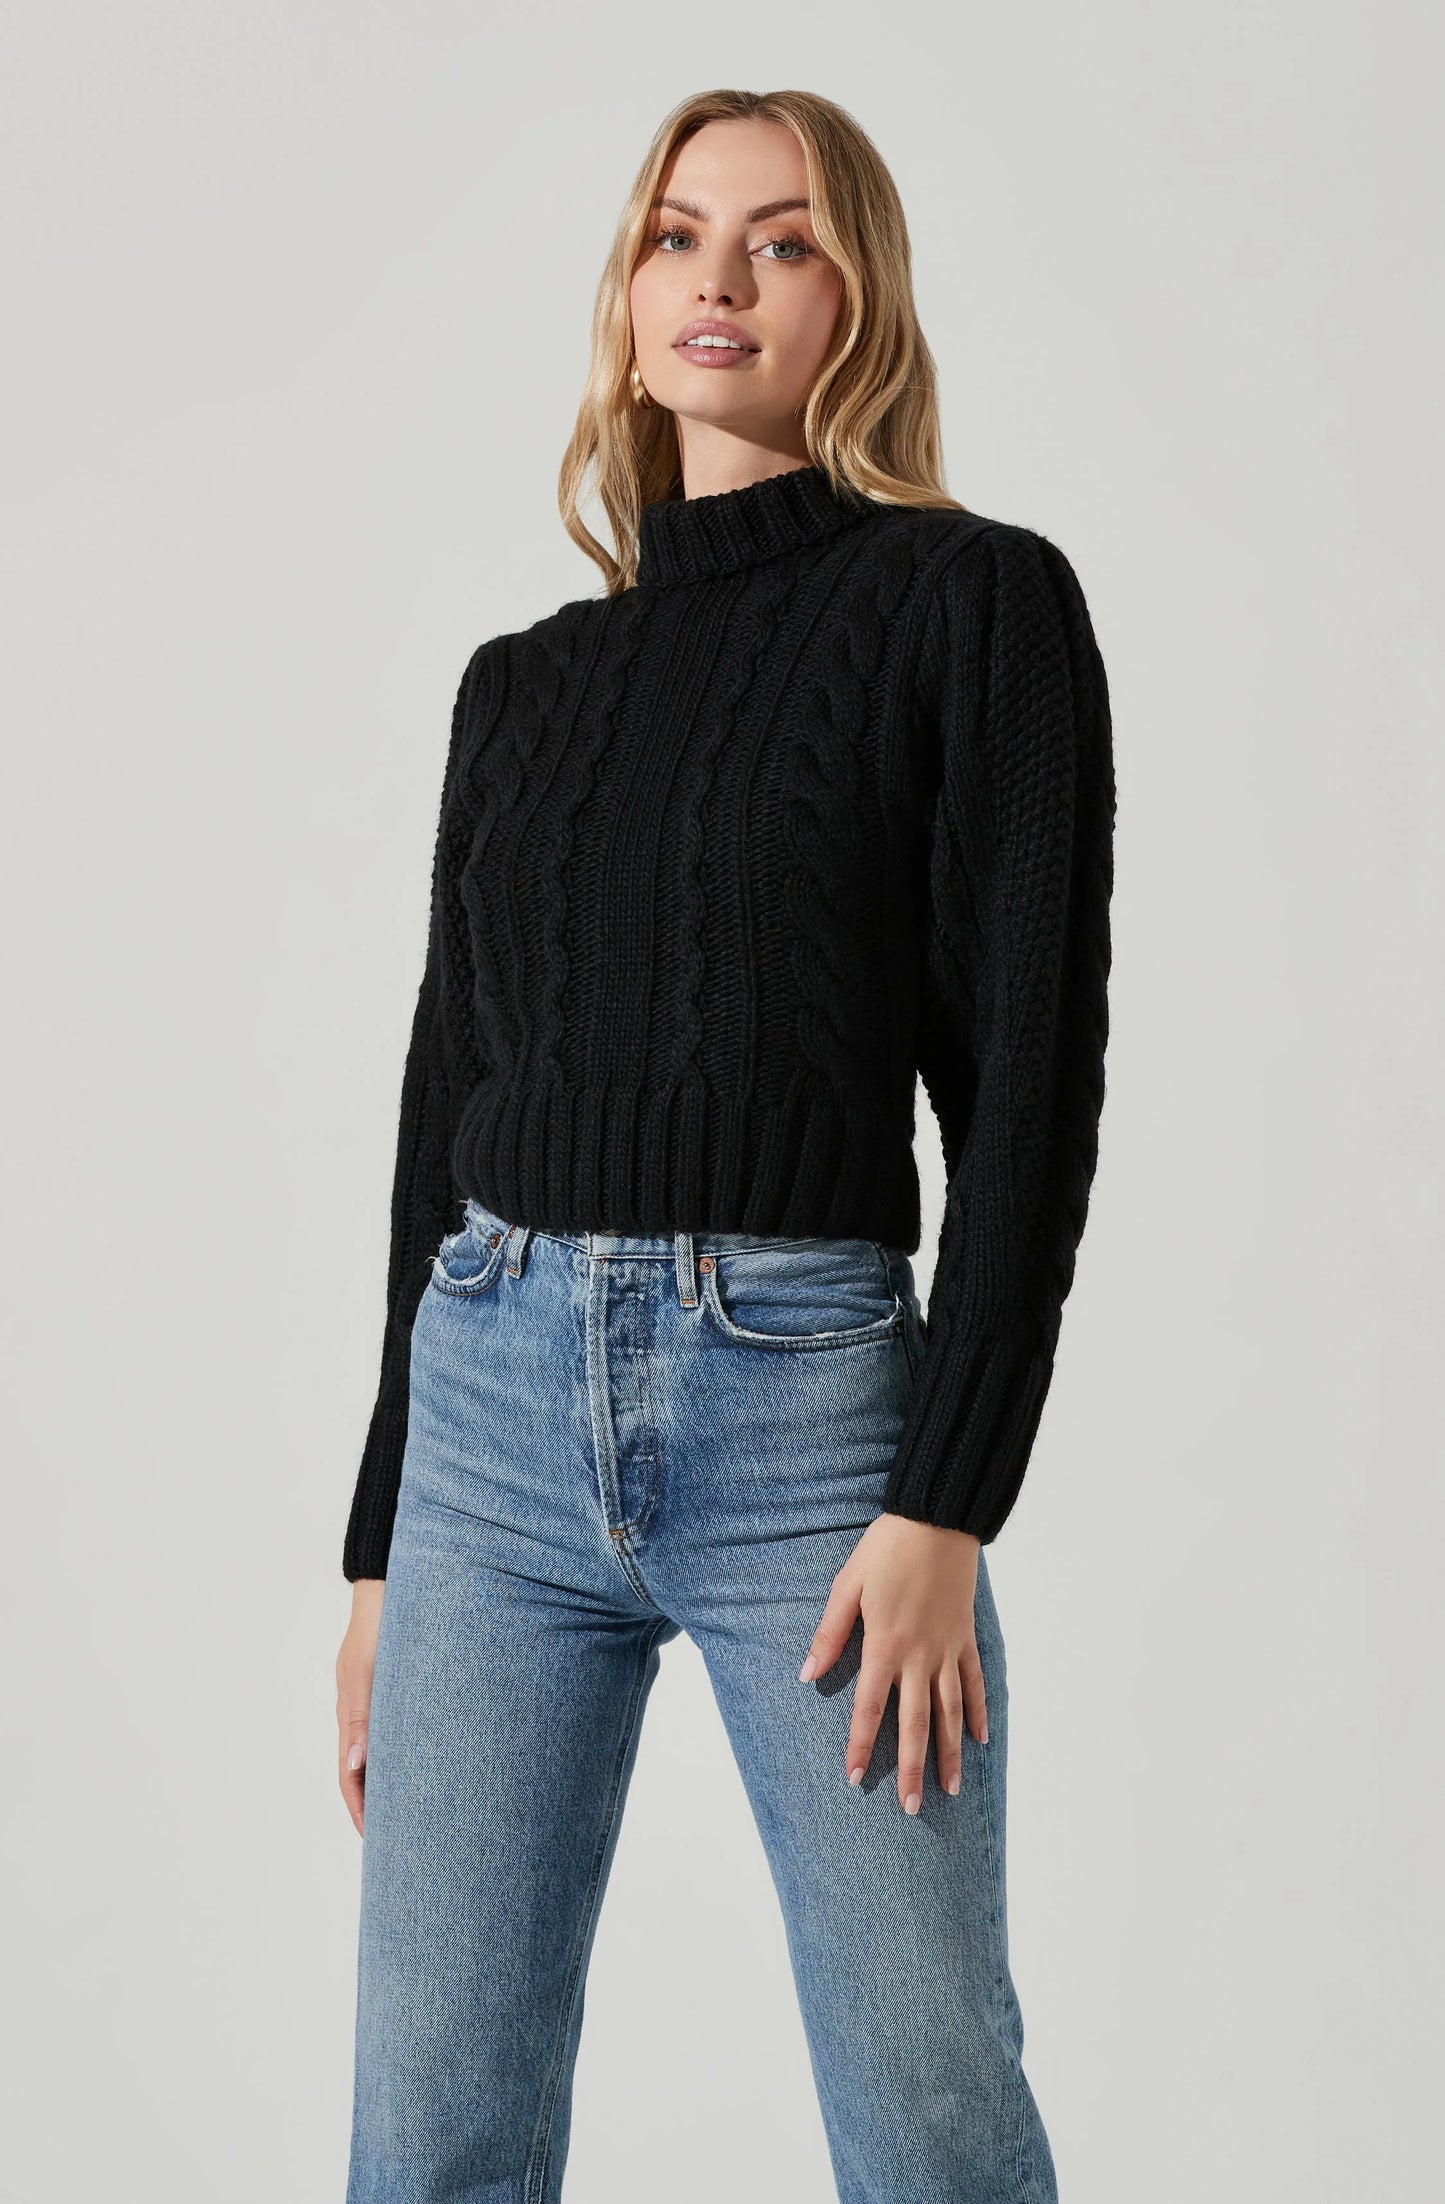 Haisley Cableknit Turtleneck Sweater